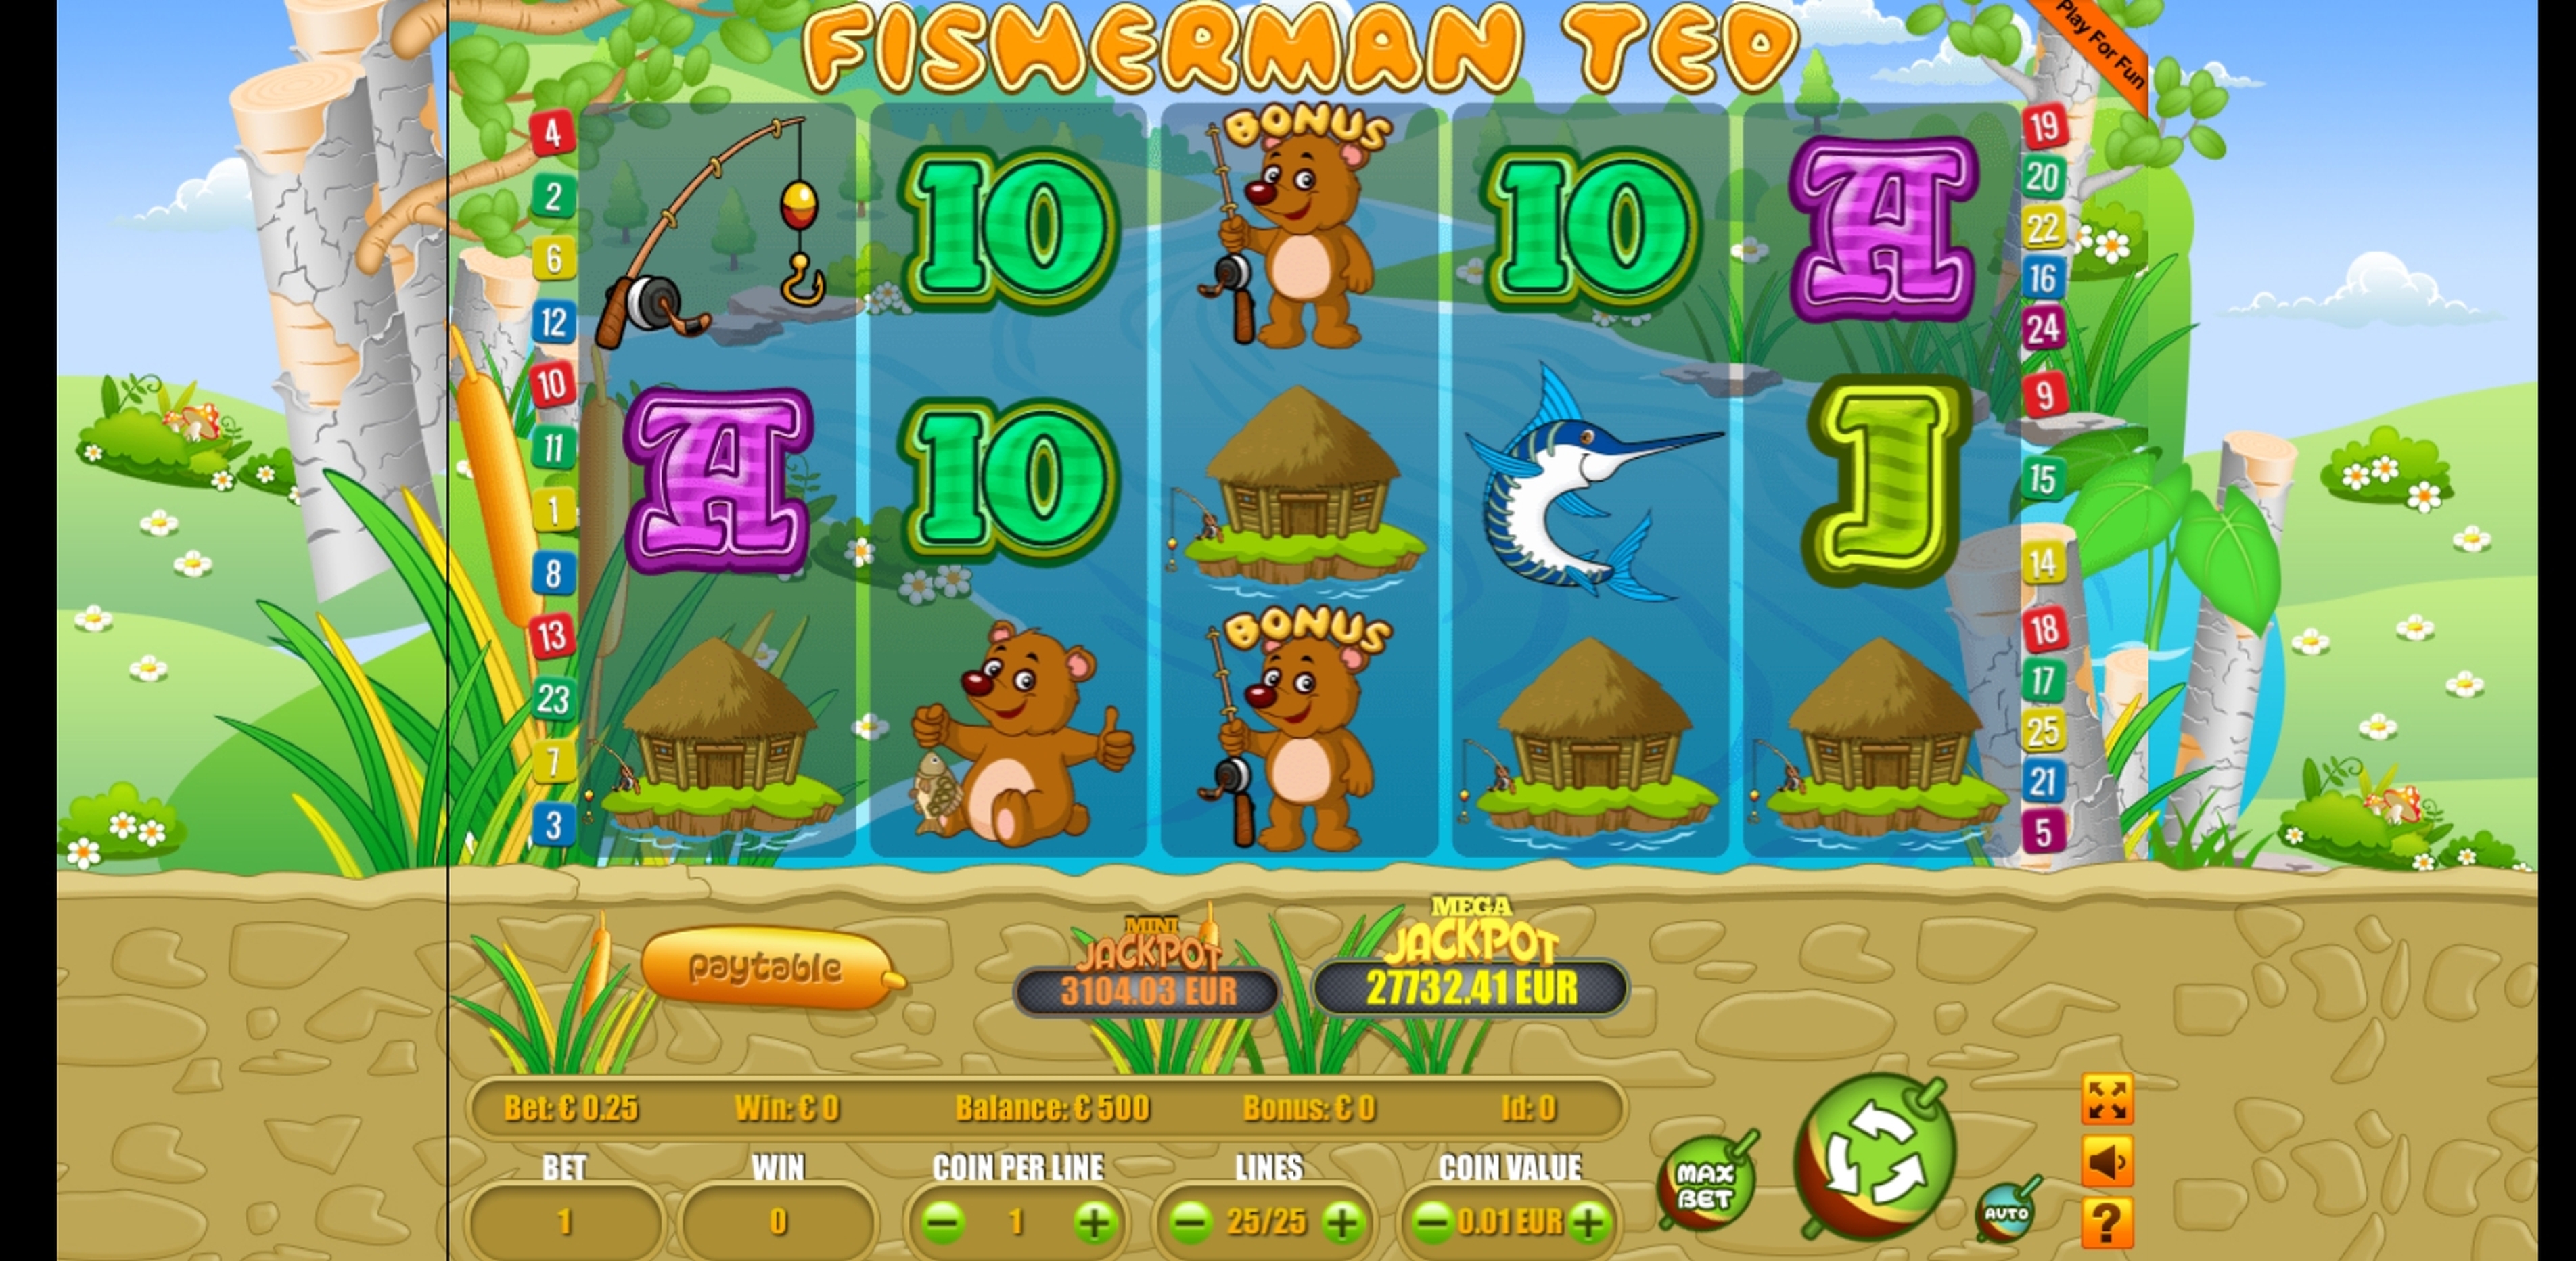 Reels in Fisherman ted Slot Game by Portomaso Gaming